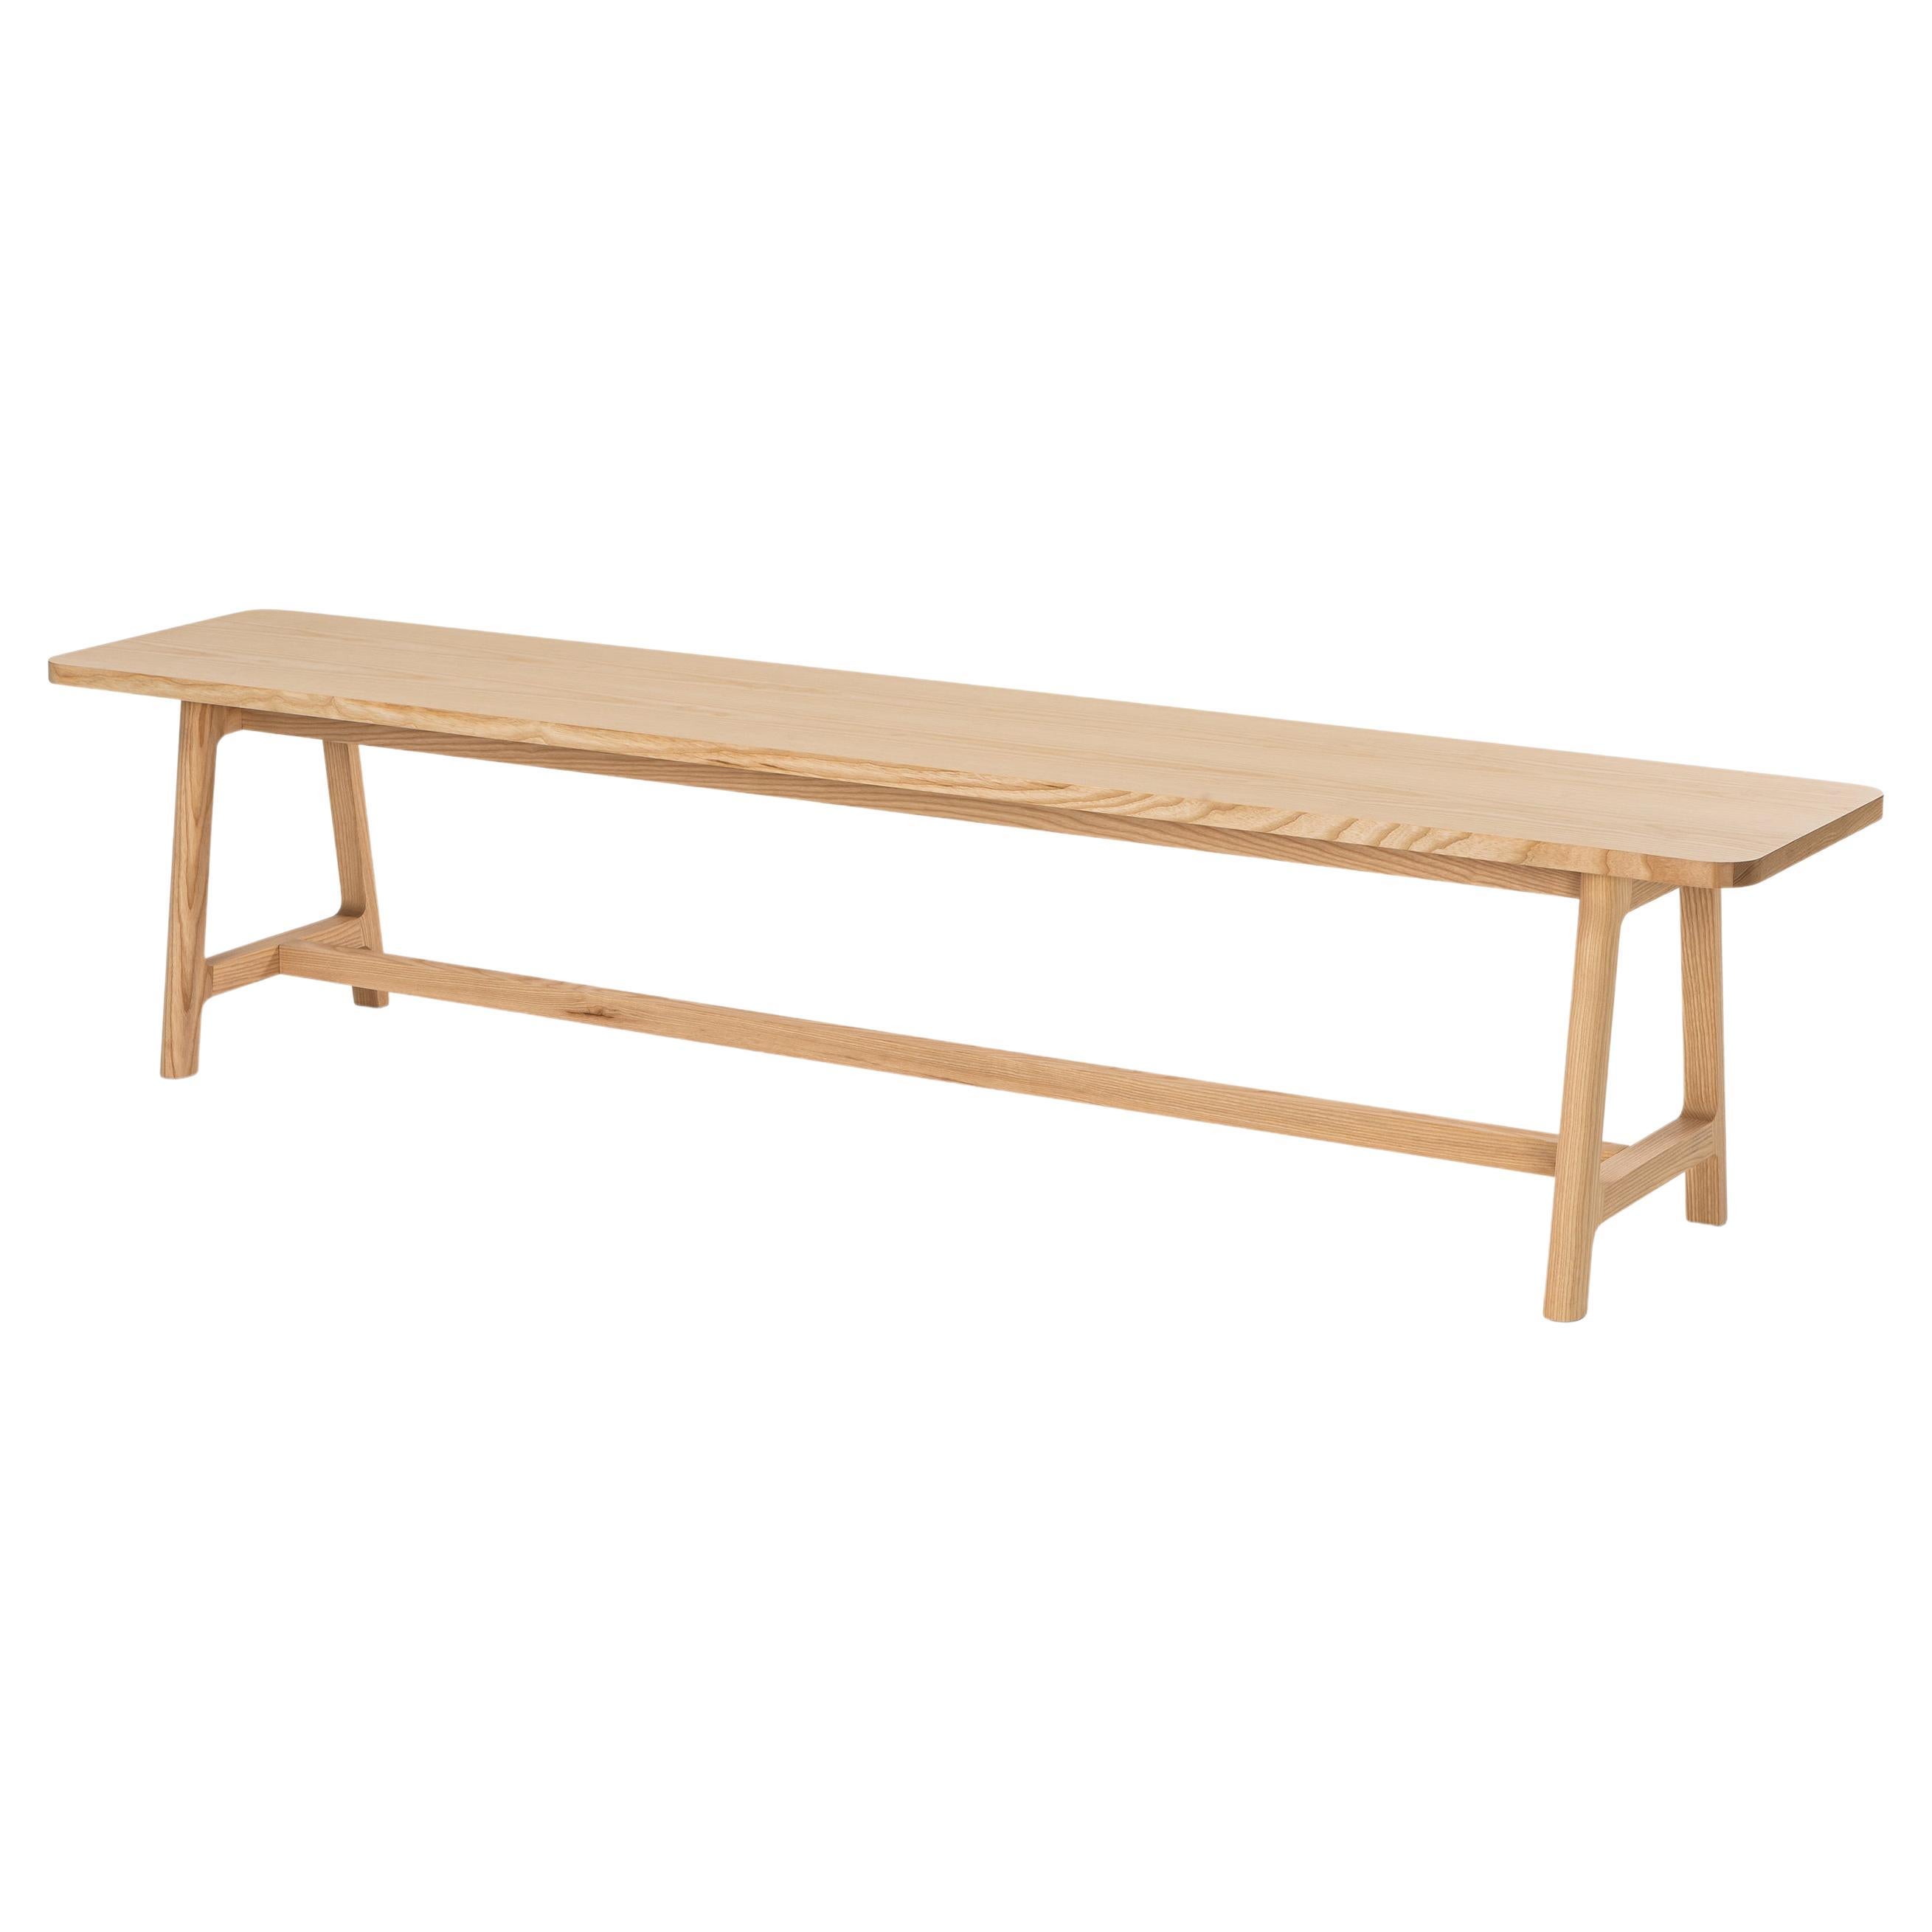 Minimalist Modern Bench in Ash Wood FRAME Collection For Sale